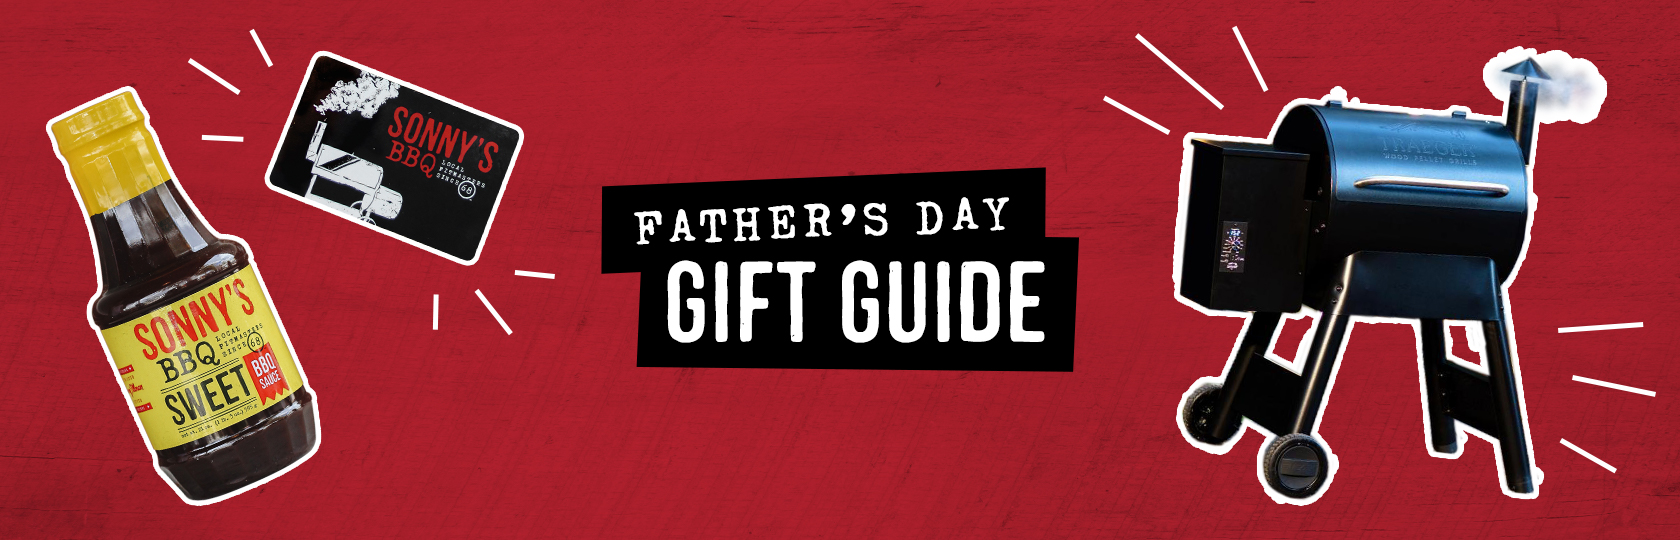 Father's Day Gift Guide - Sonny's BBQ